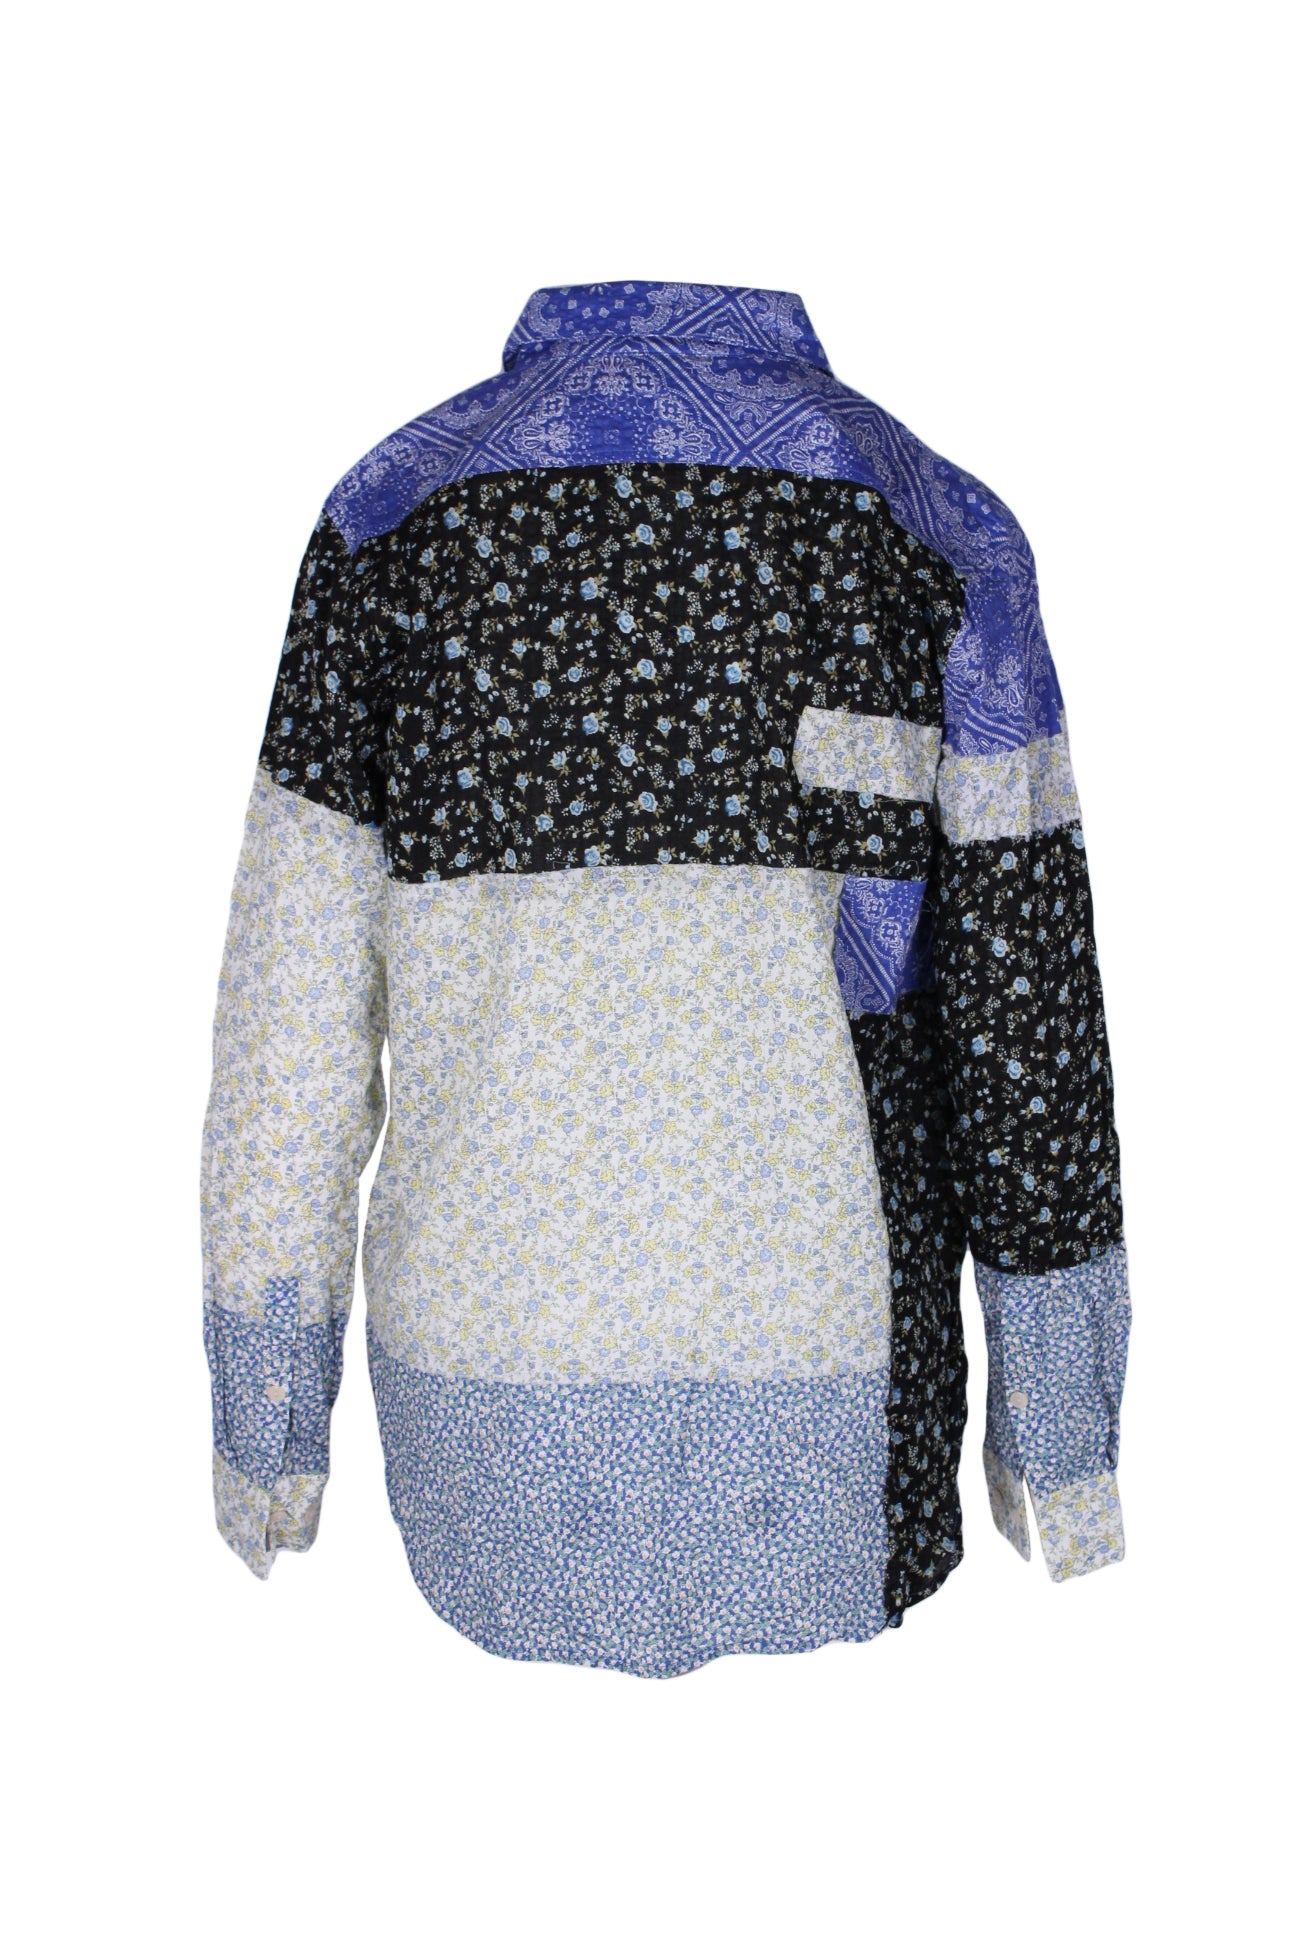 rear of blue long sleeve shirt highlighting the contrasting floral themed patched construction. 